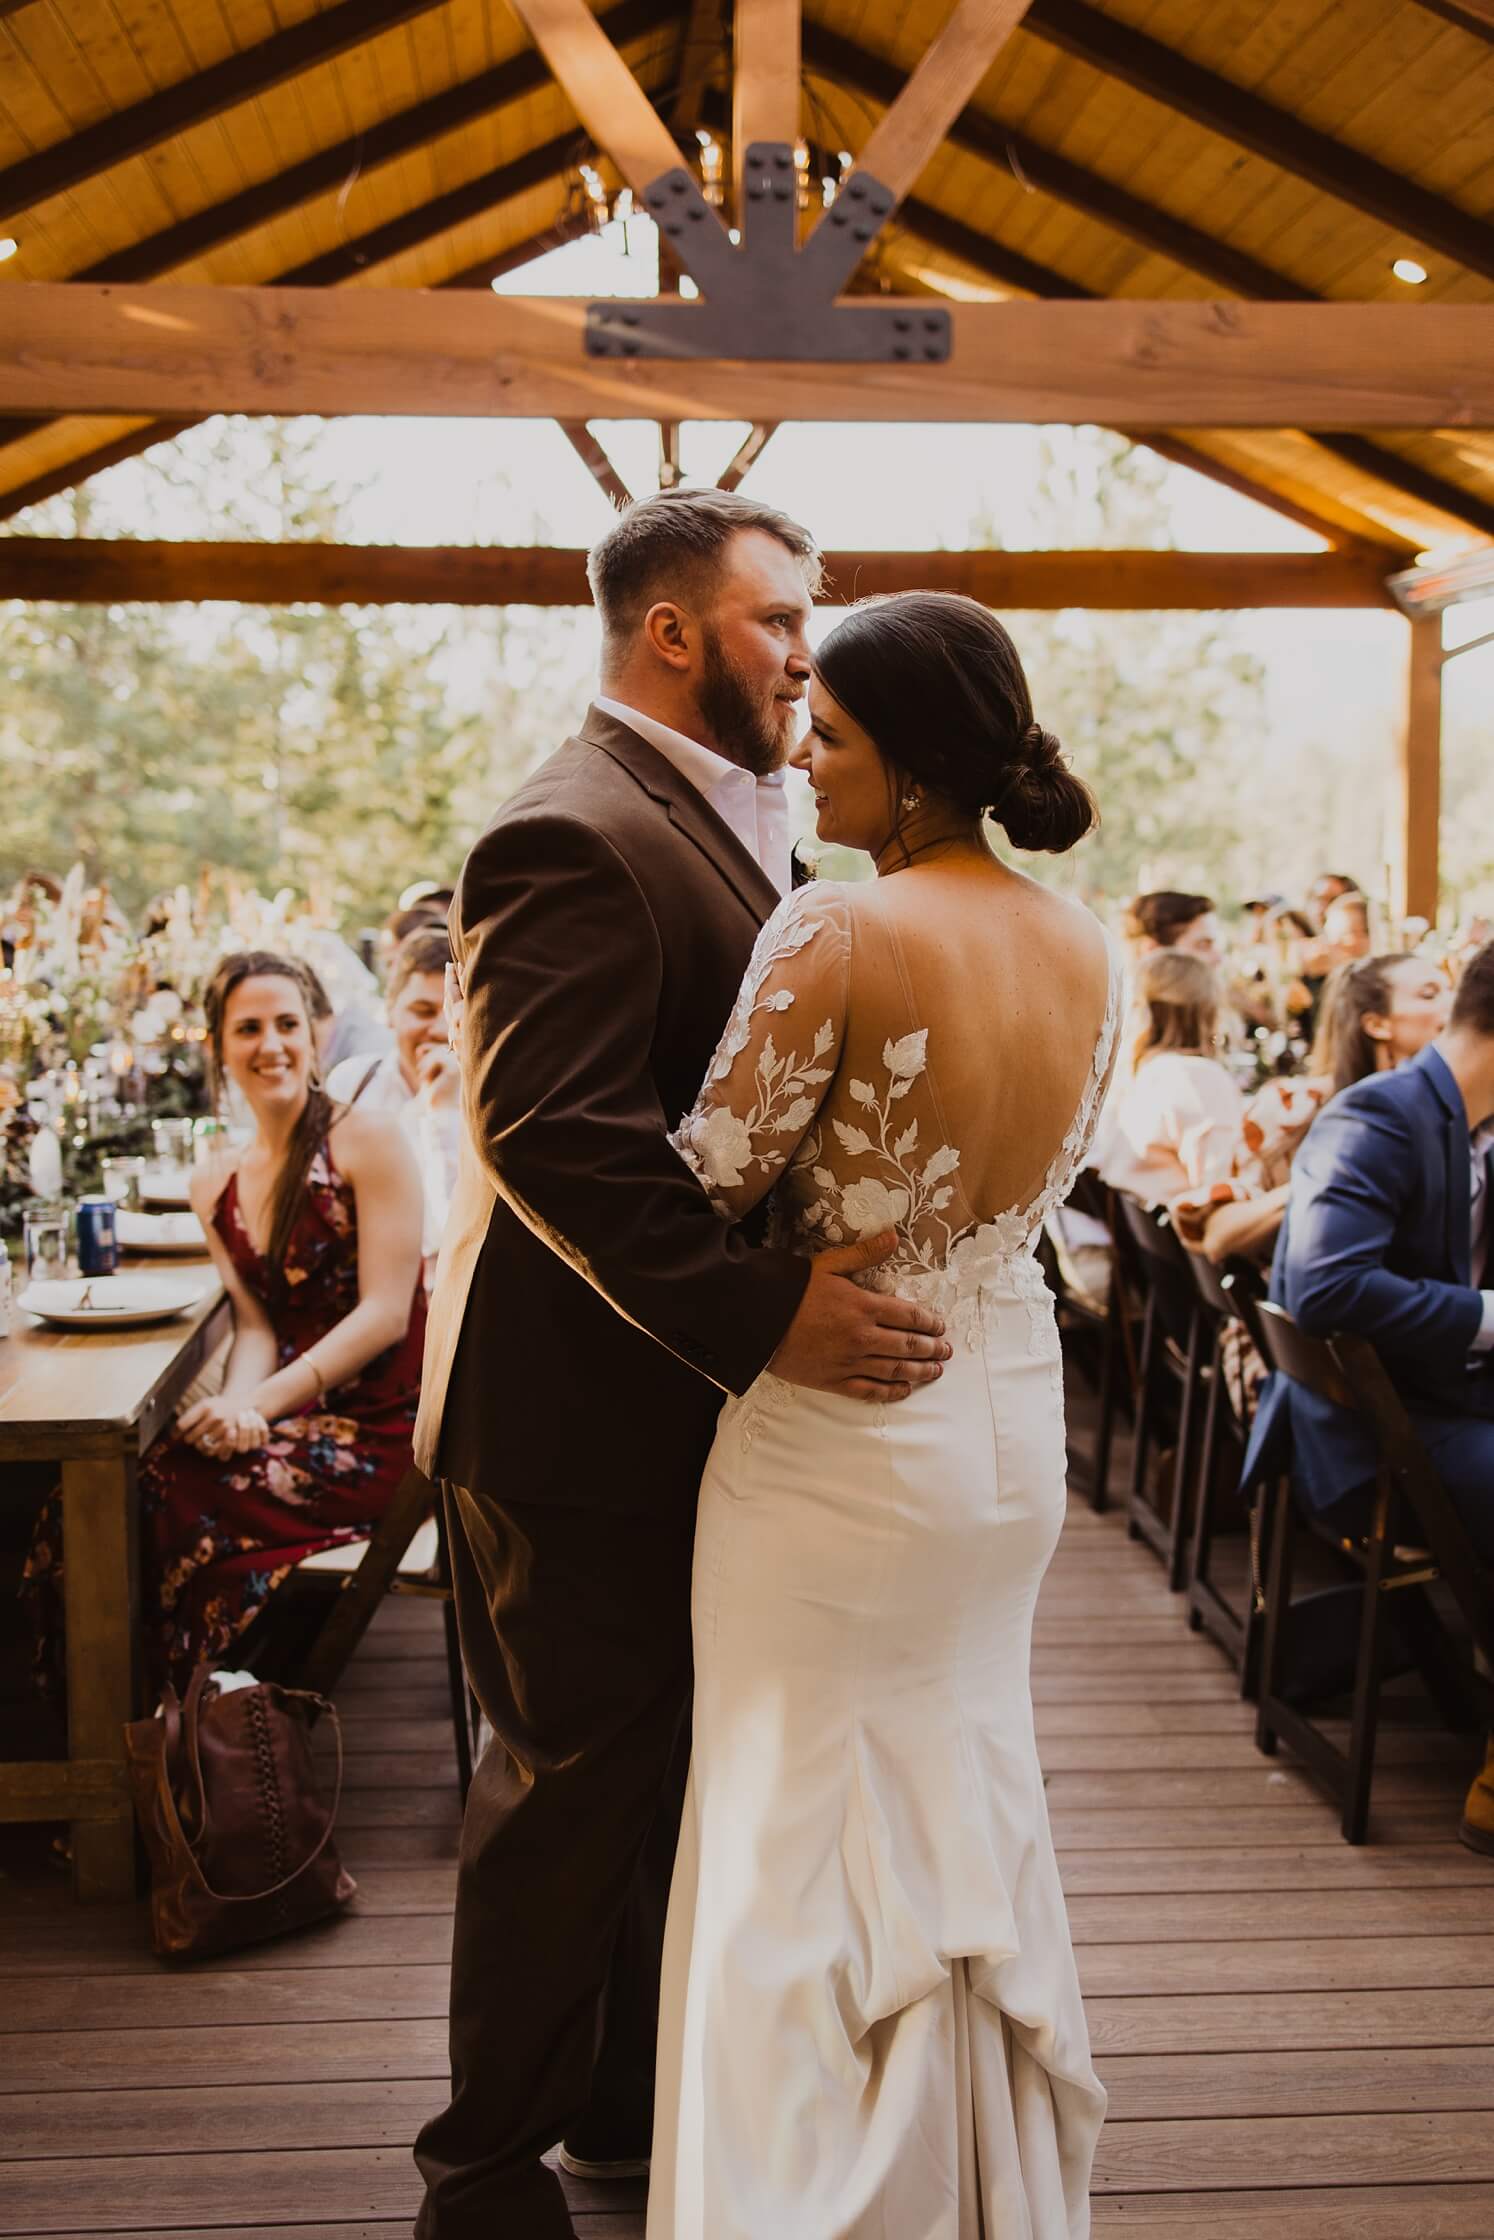 Bride and groom's first dance at Juniper Mountain House | McArthur Weddings and Events